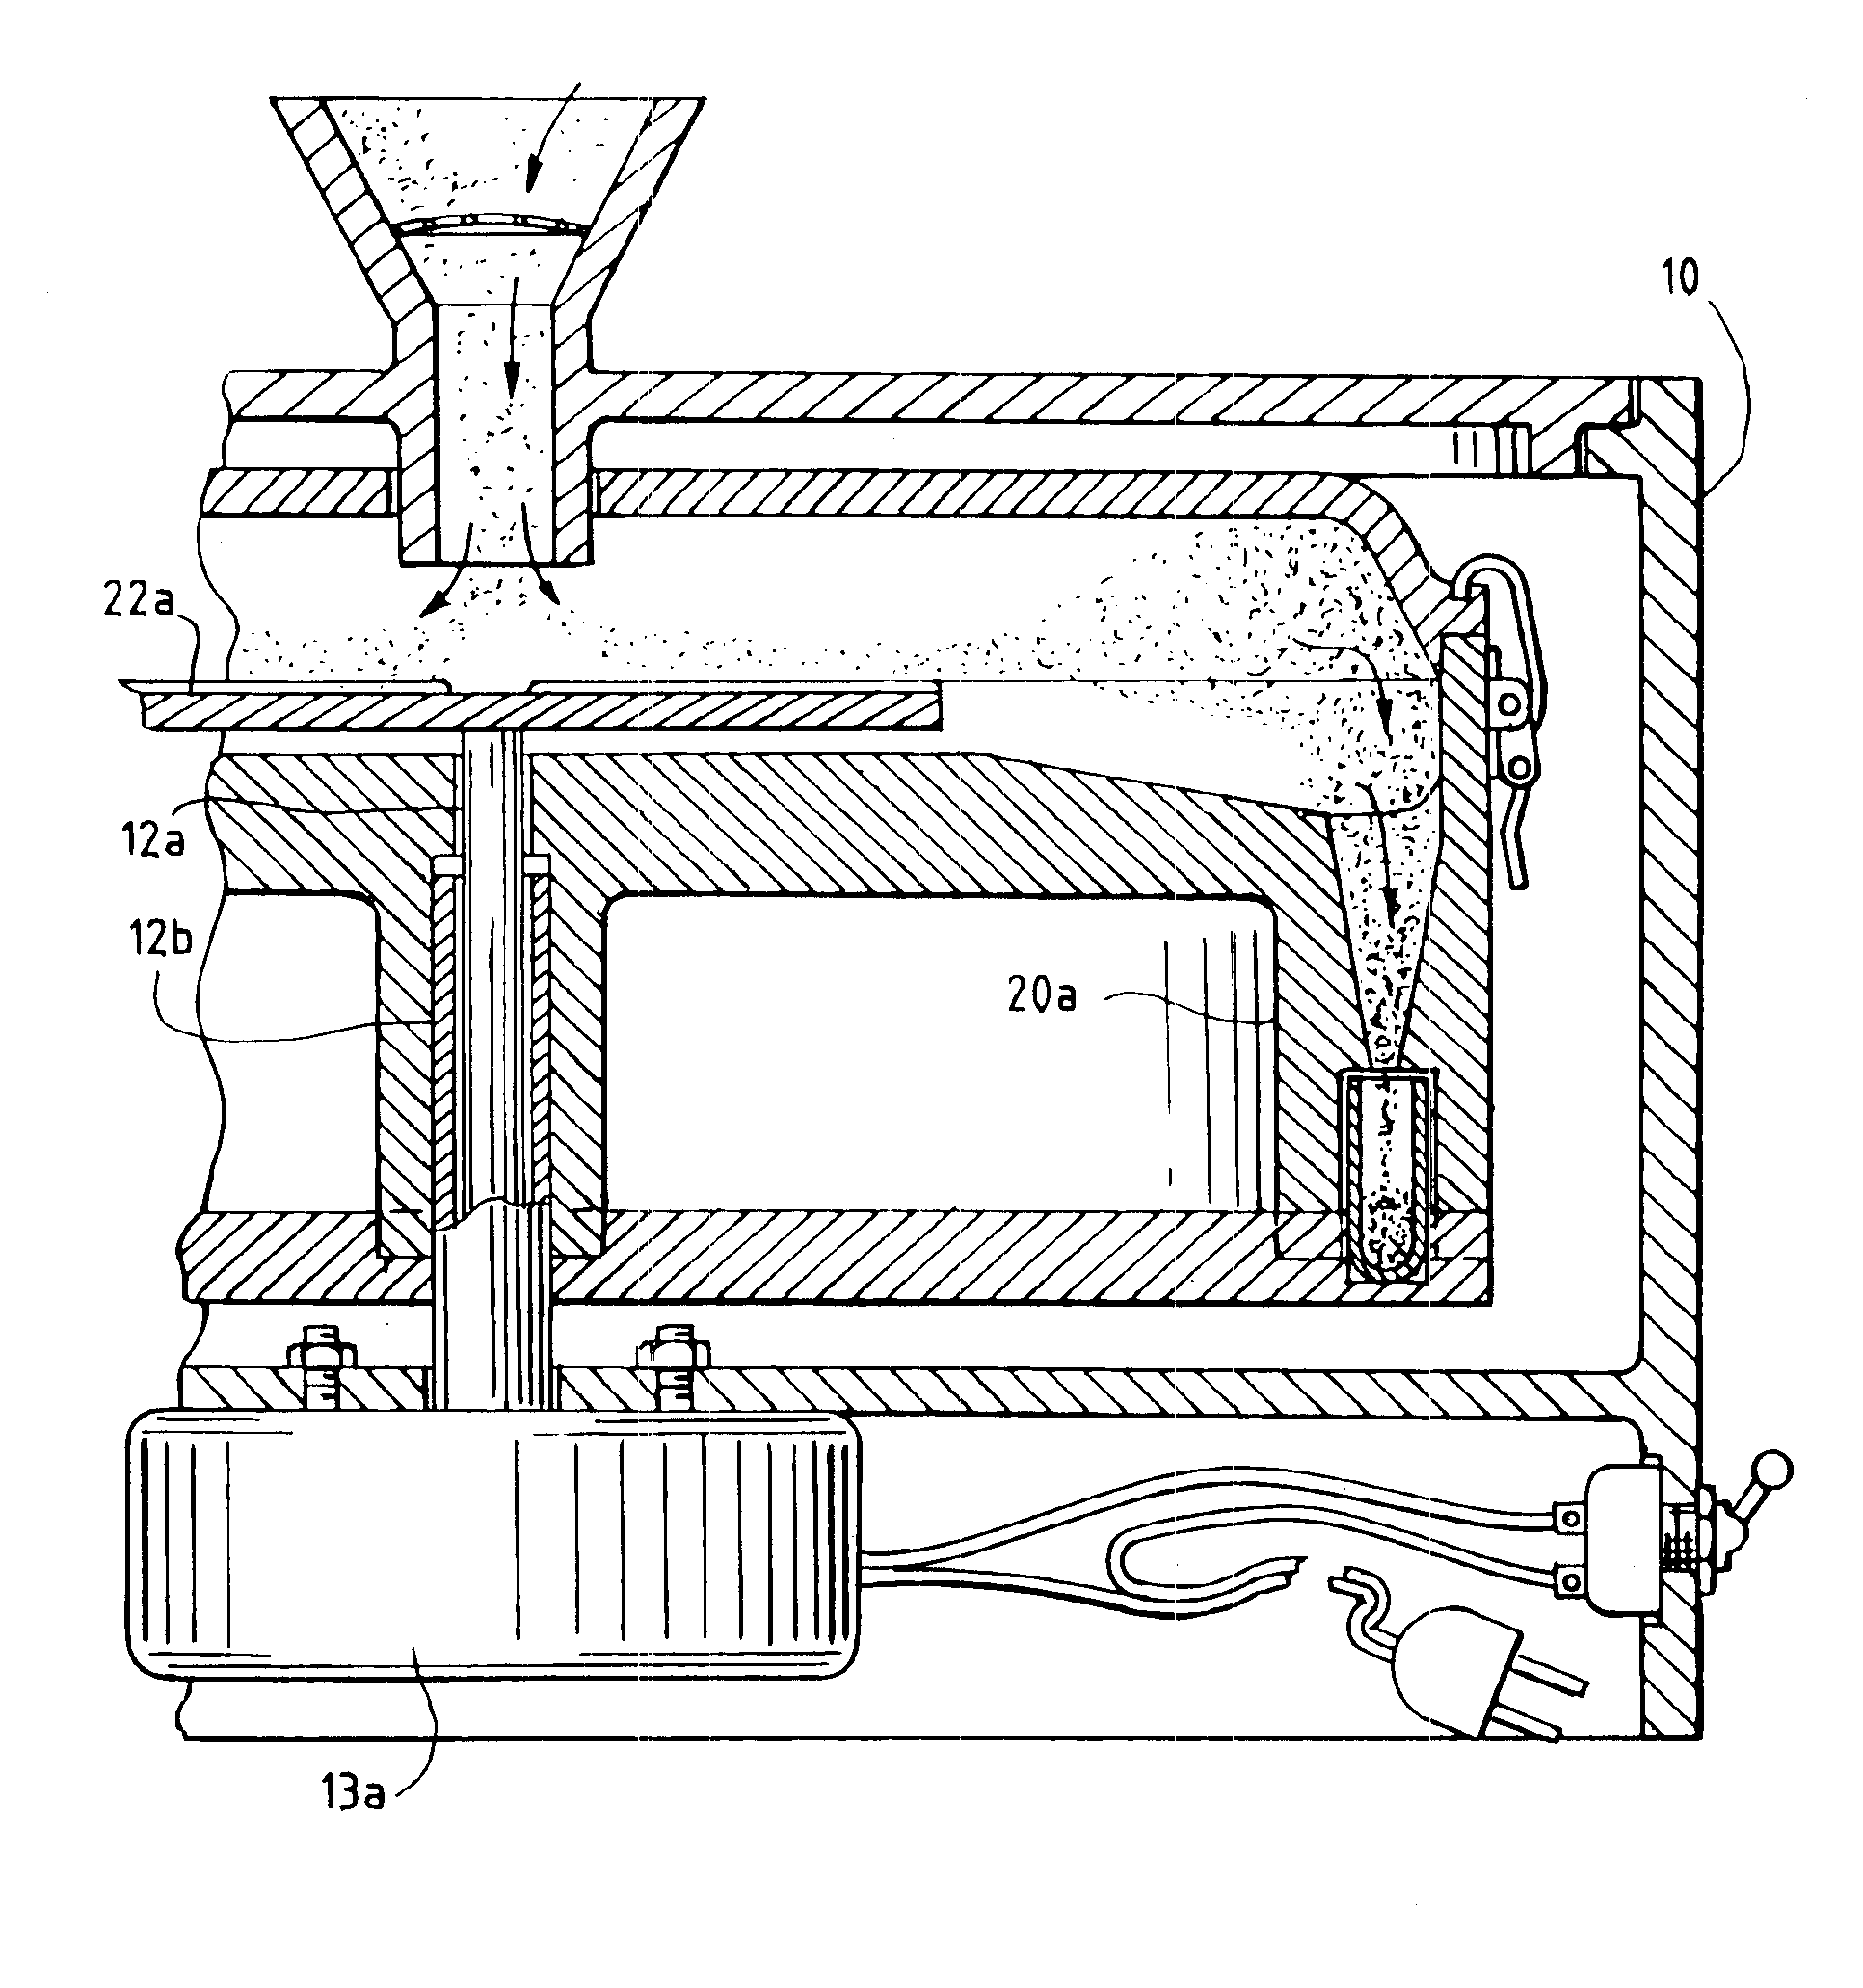 Capsule filling device and method of operation